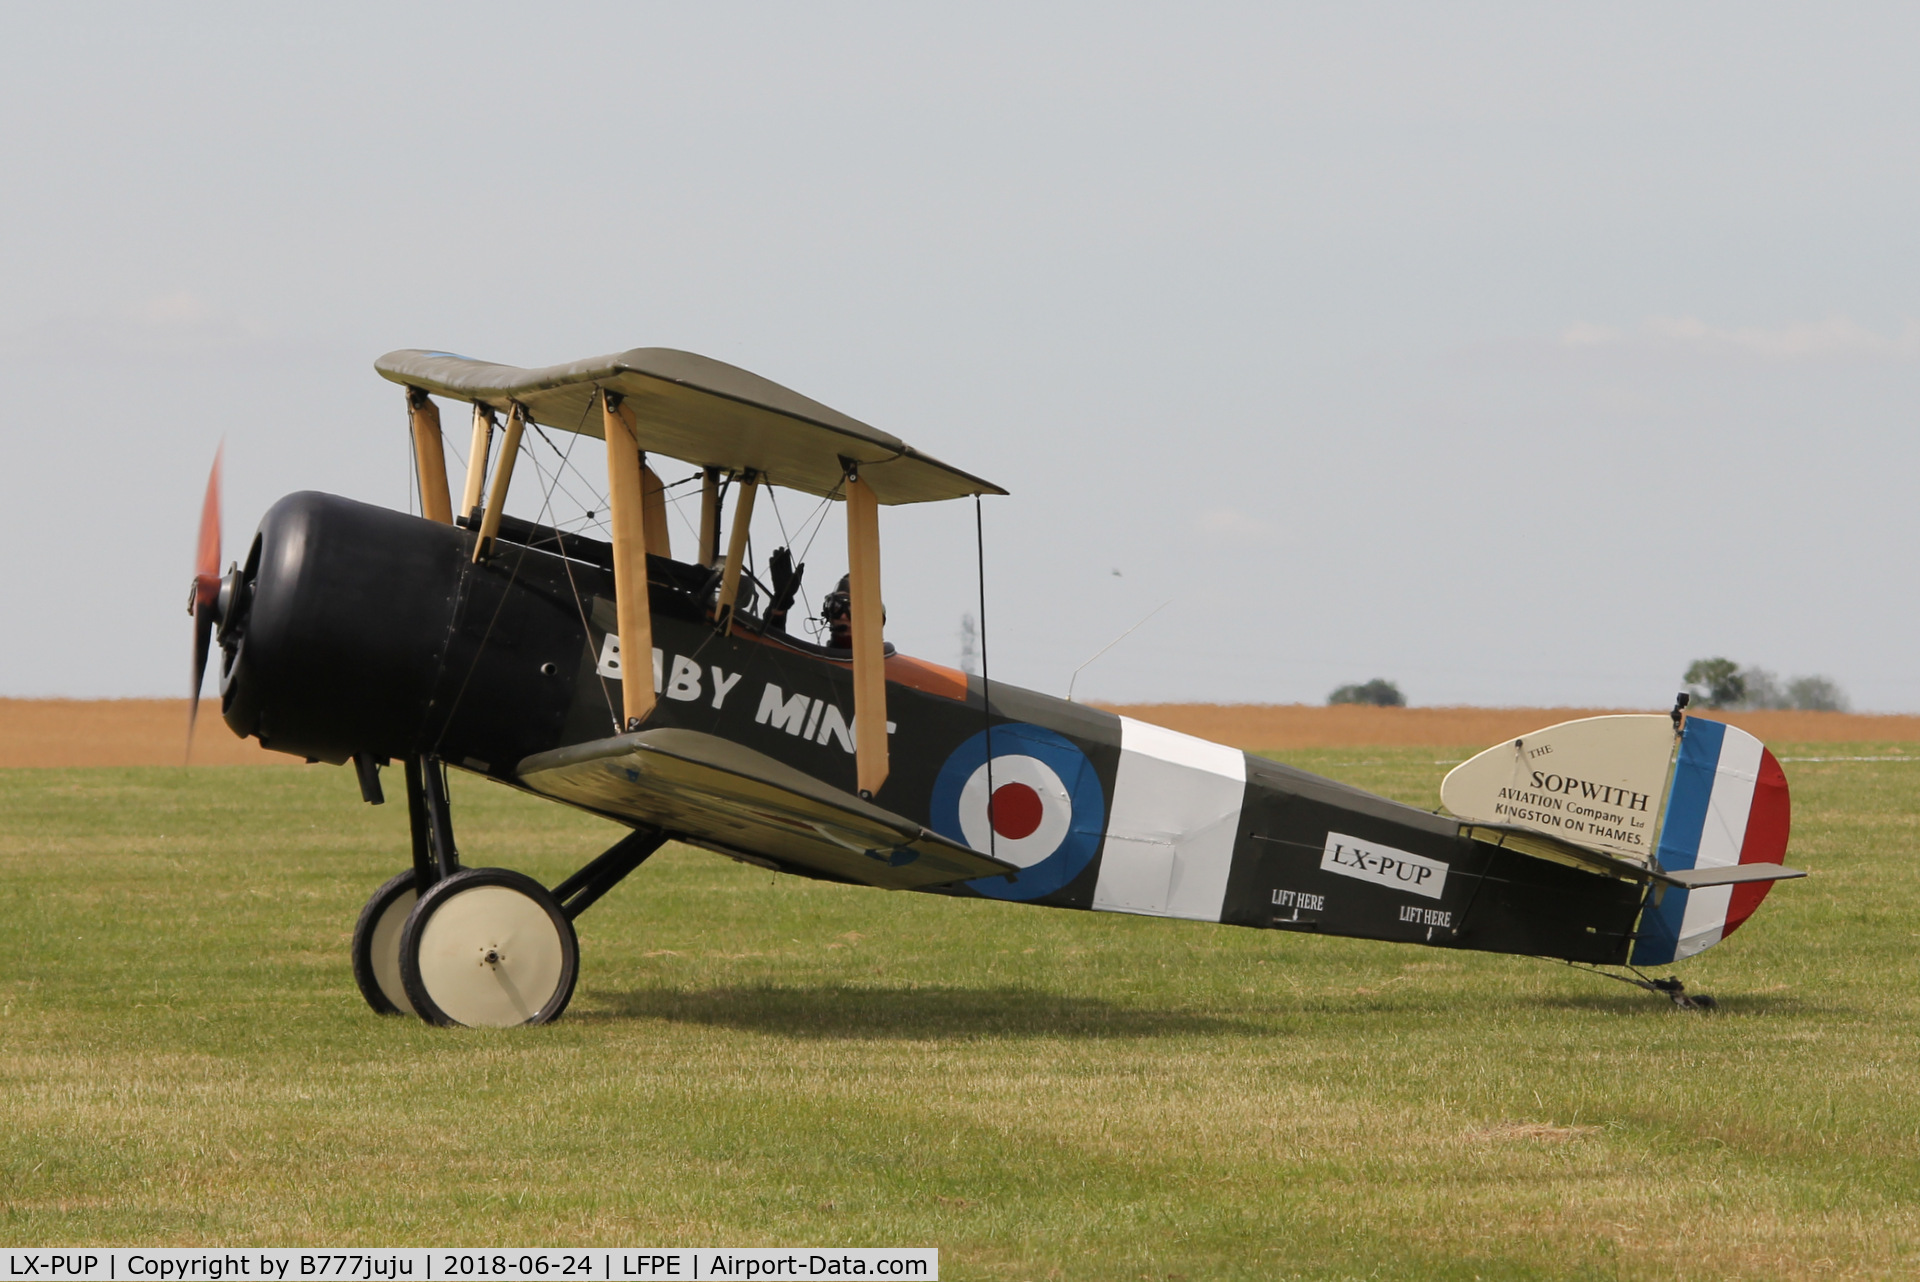 LX-PUP, Sopwith Pup Replica C/N 11, at Meaux Airshow